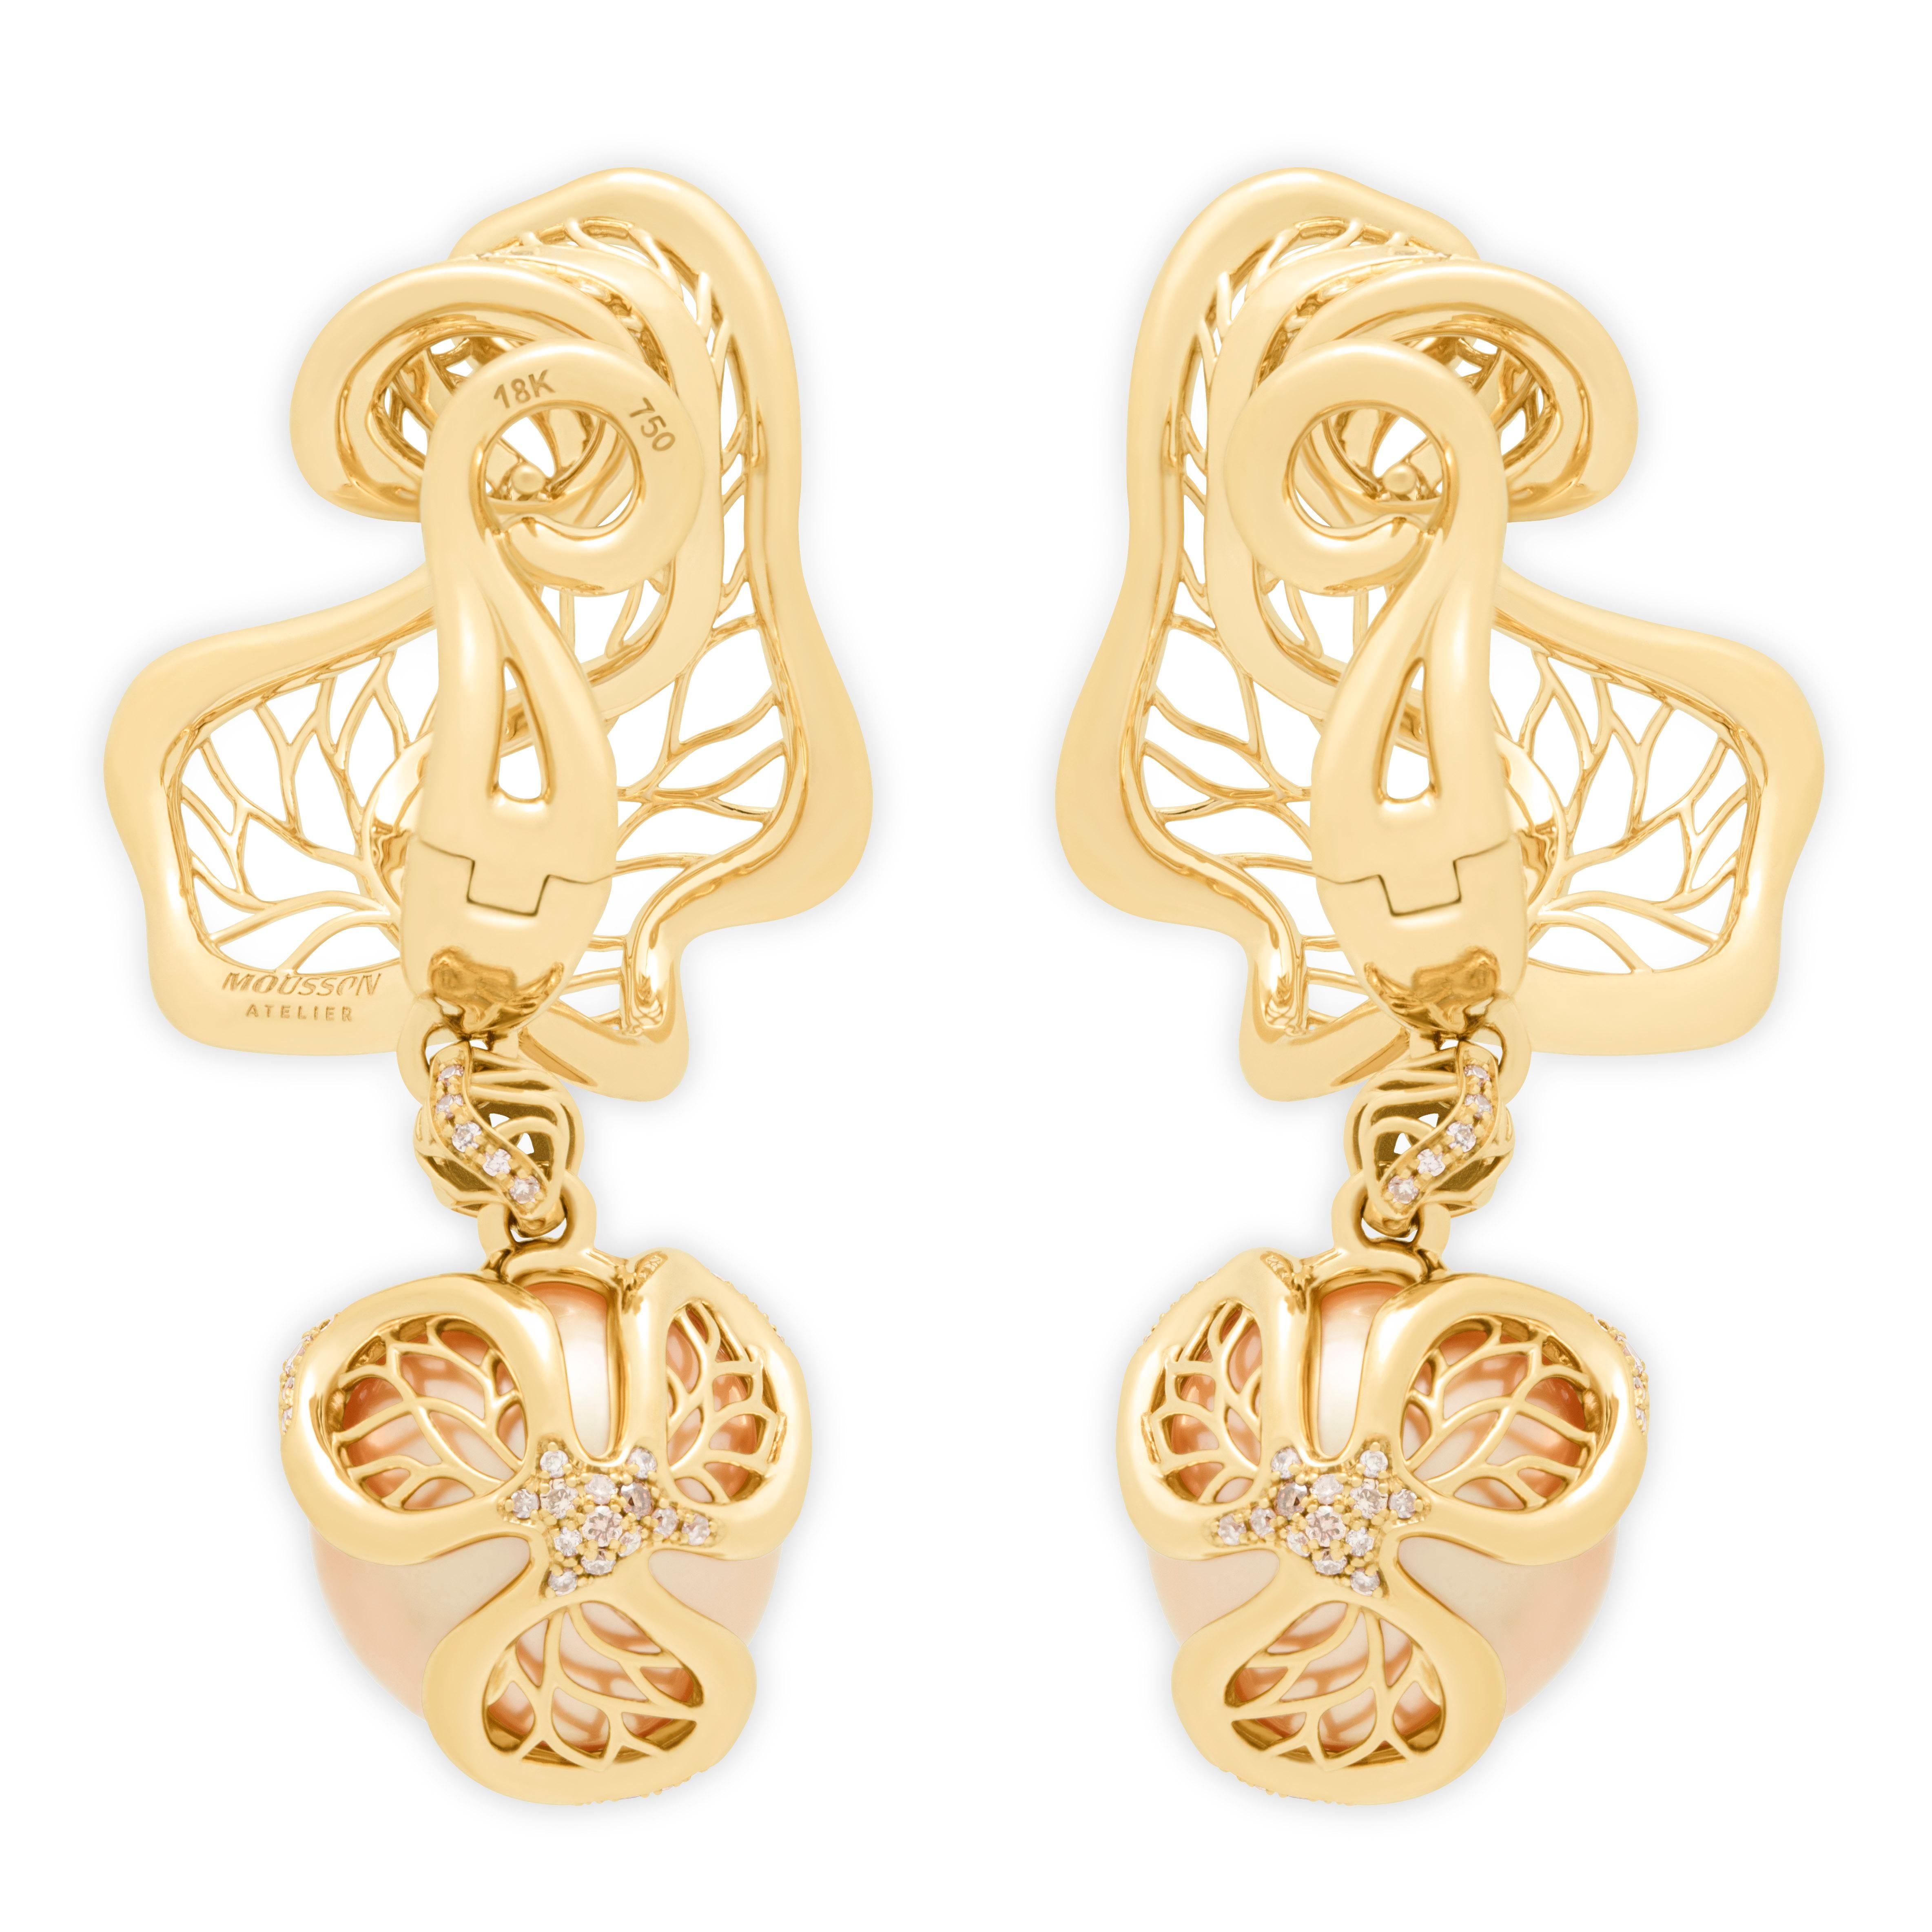 Golden South Sea Pearl Brown Diamond 18 Karat Yellow Gold Winter Cherry Earrings
Impressive size Golden South Sea Pear and Champagne Diamonds complement each other in these Chandelier Earrings. If you are a Pearl Lover, these earrings will